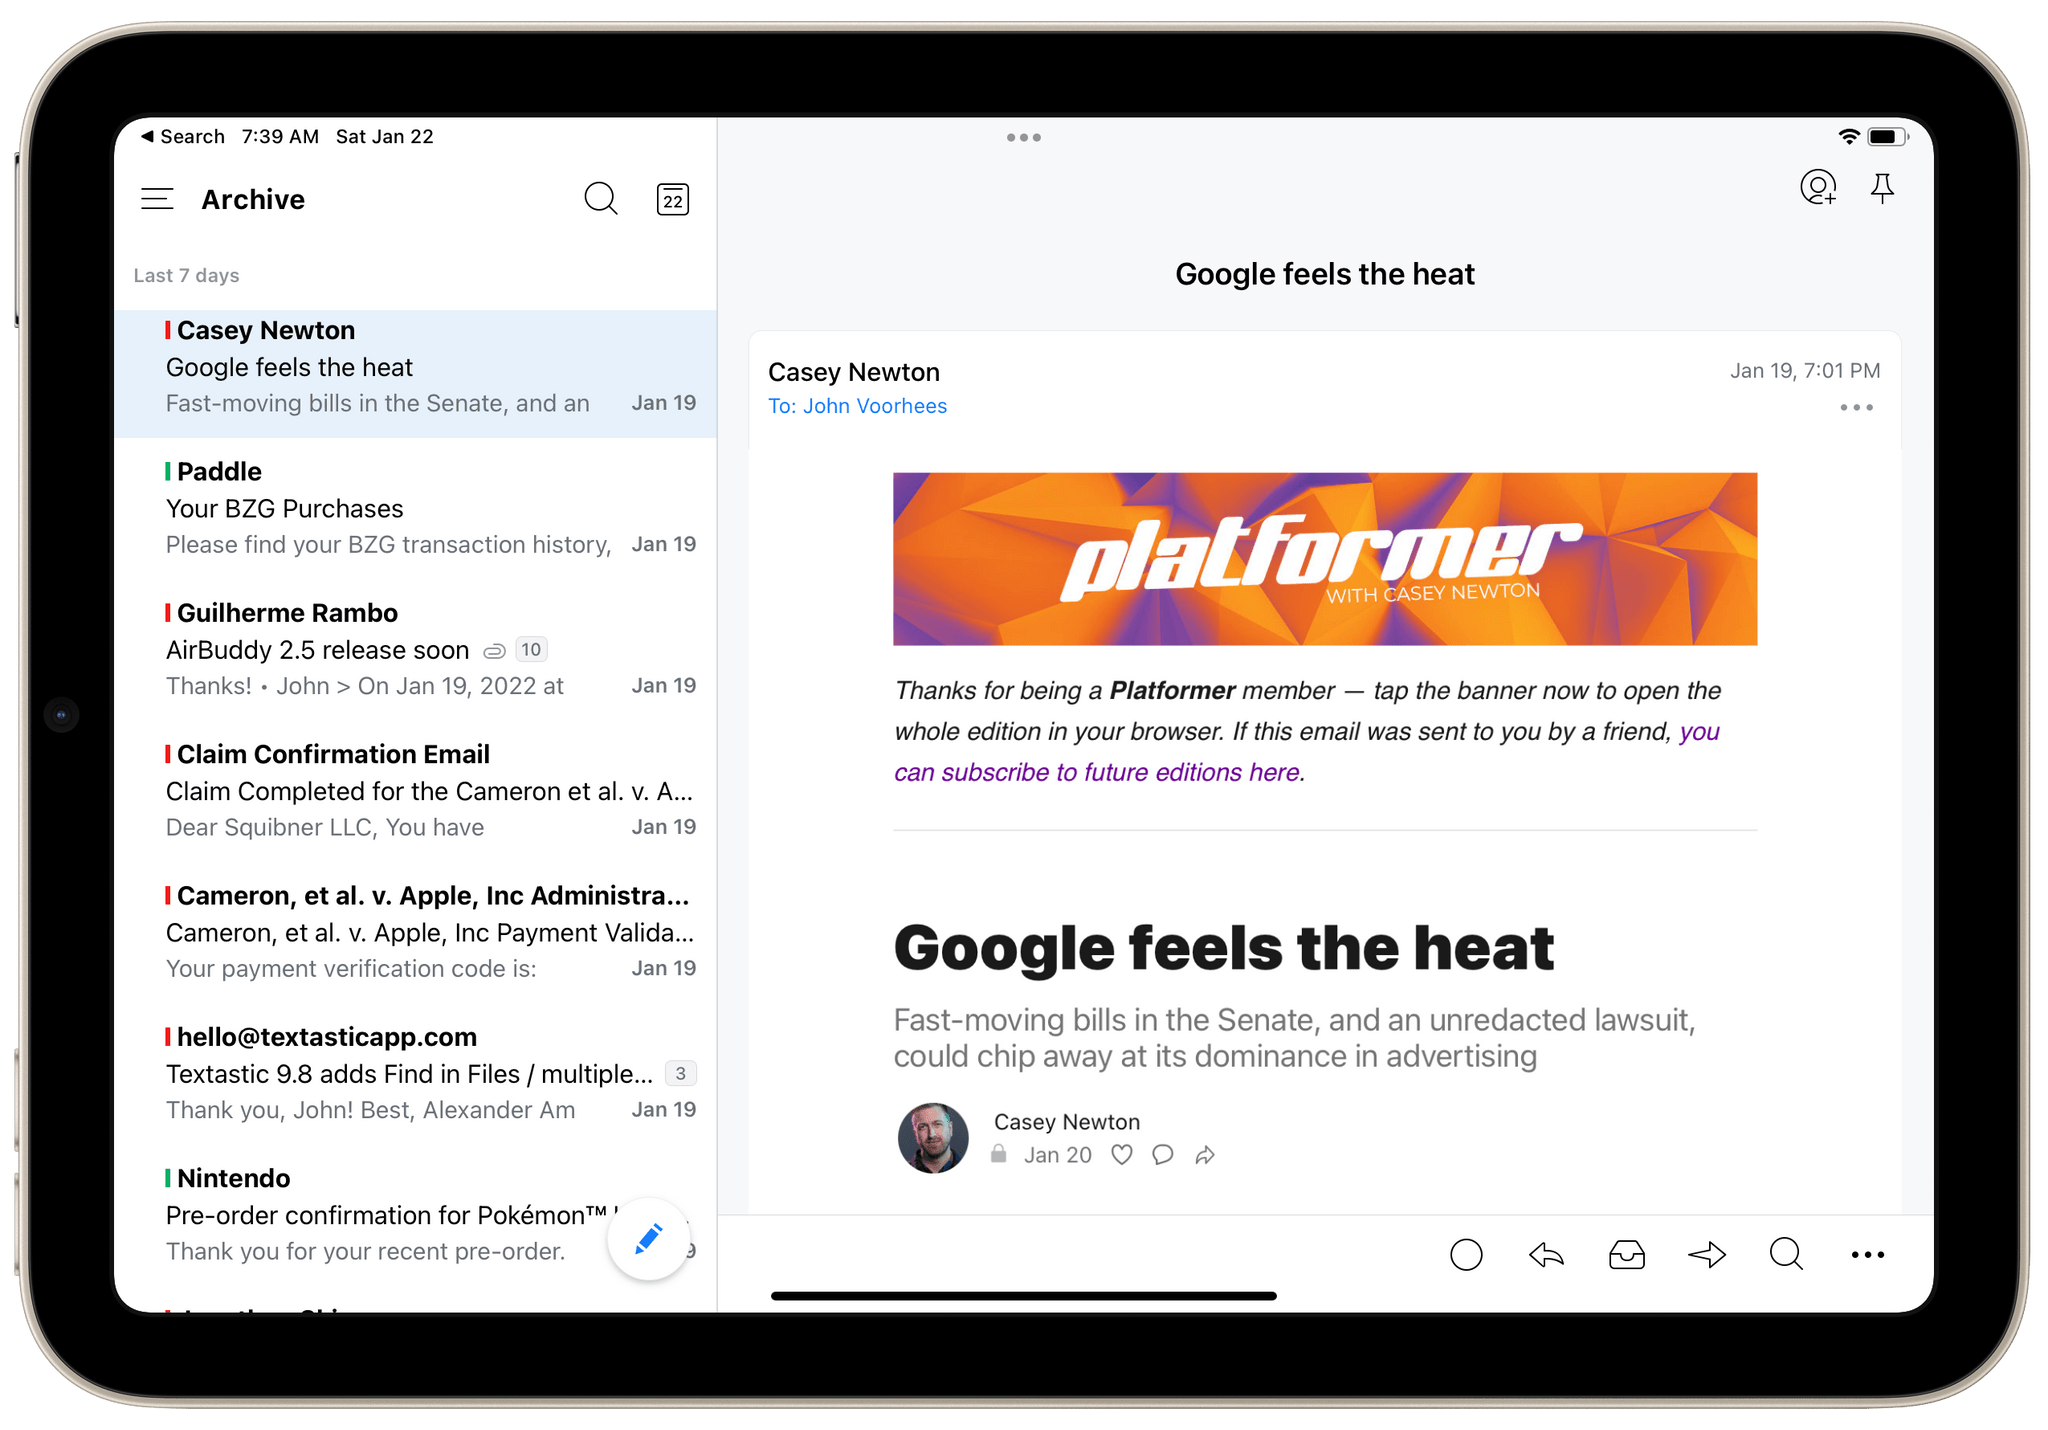 On the iPhone and iPad, Spark is my go-to email client.